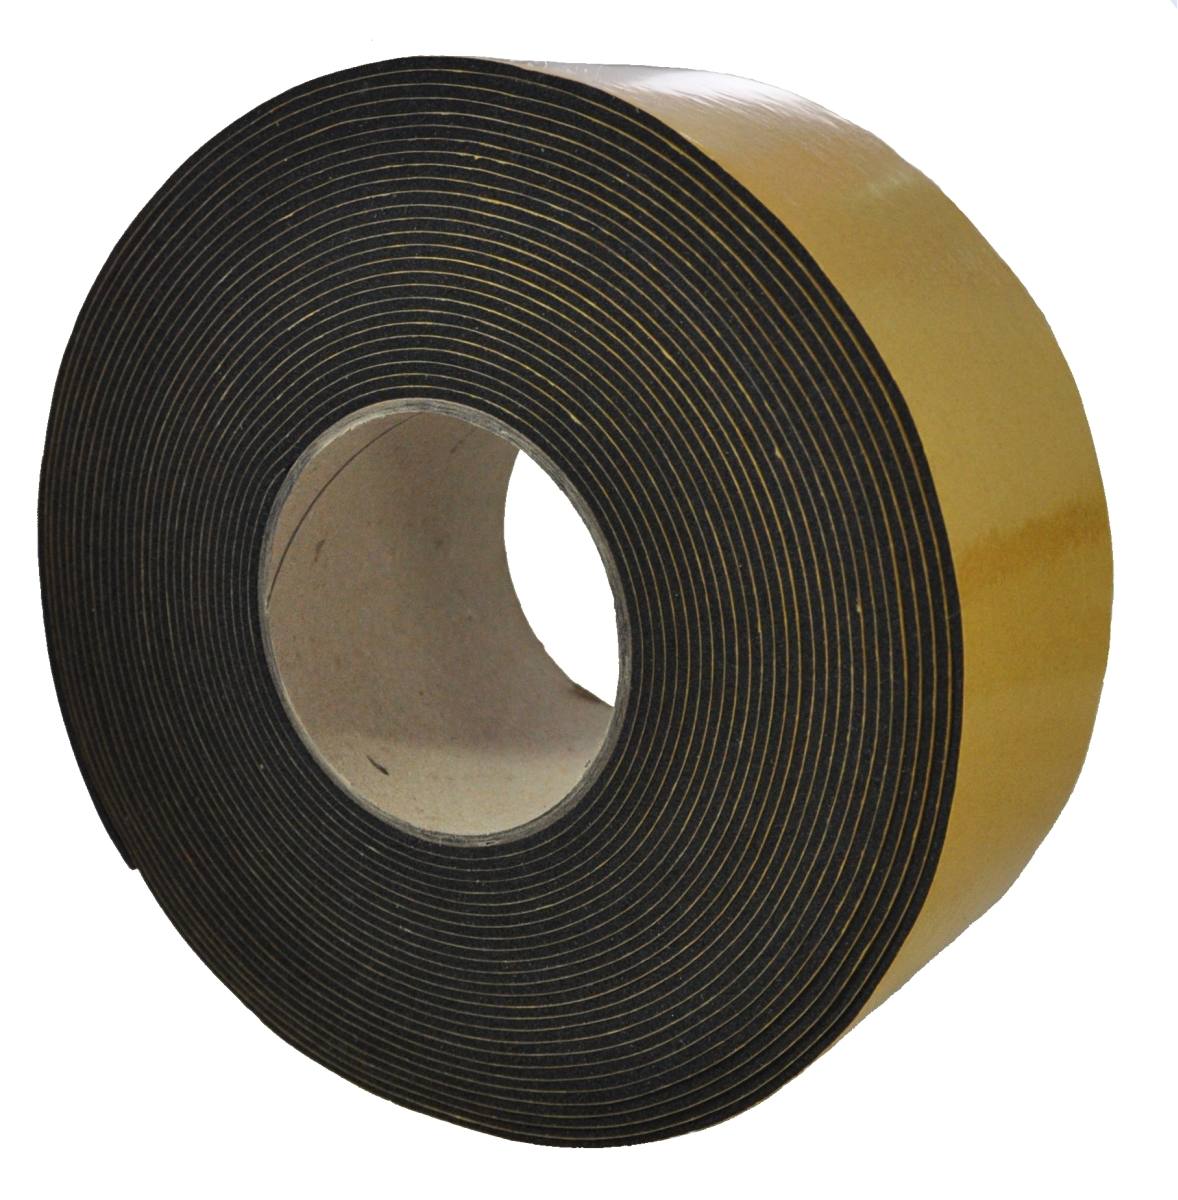 S-K-S EPDM 3mmx25mmx10m black self-adhesive on one side